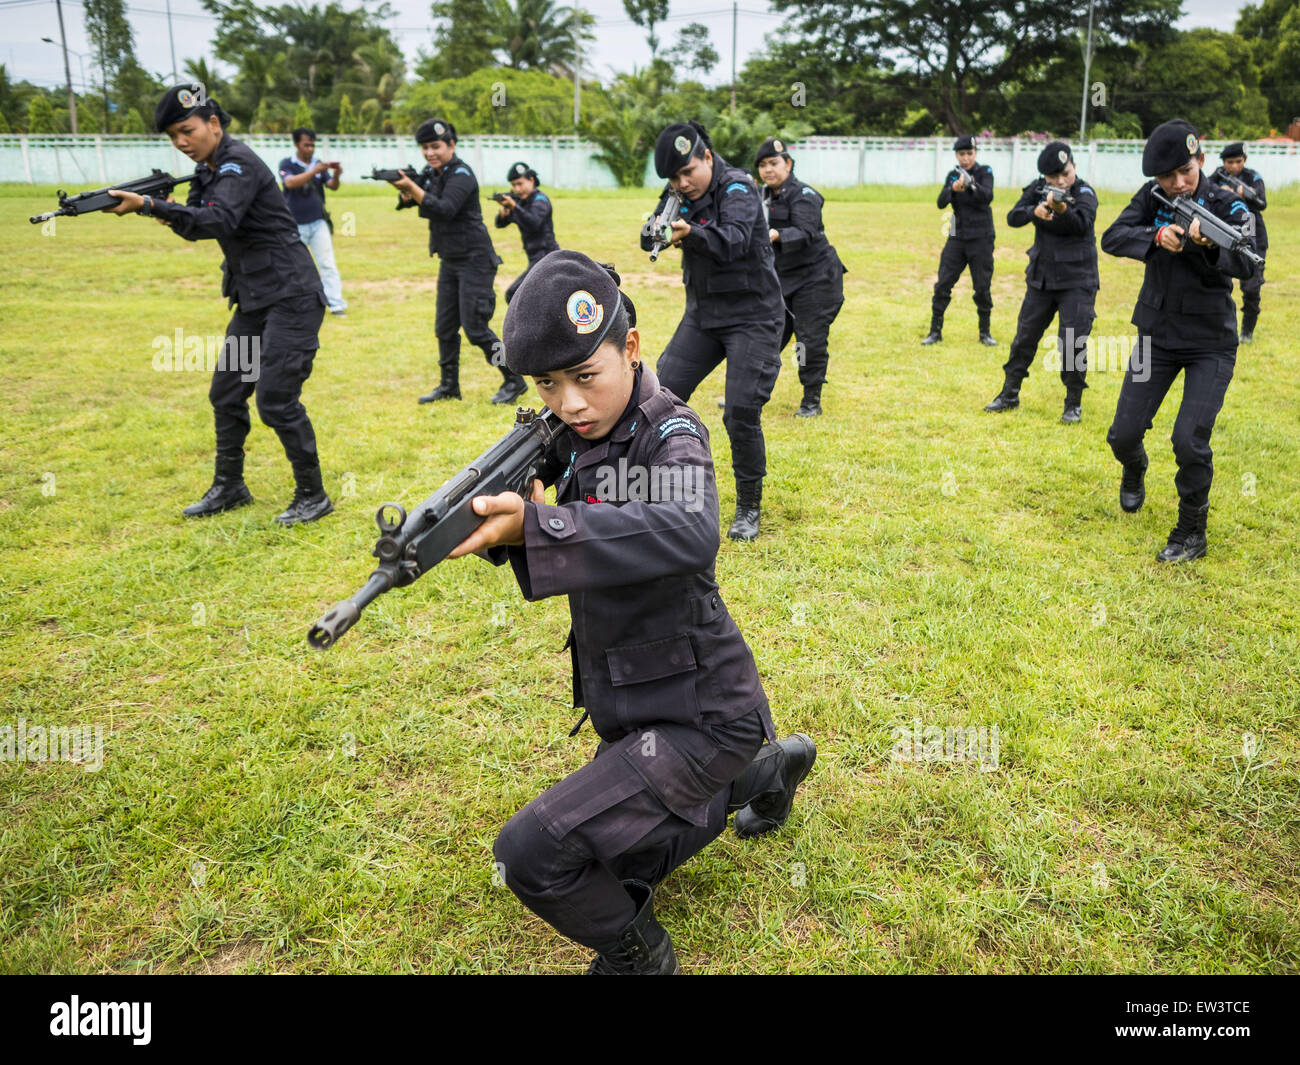 June 17, 2015 - Rangae, Narathiwat, Thailand - Thai women Rangers drill with HK33 Assault Rifles. There are 5 platoons of women Rangers serving in Thailand's restive Deep South. They generally perform security missions at large public events and do public outreach missions, like home wellness checks and delivering food and medicine into rural communities. The medics frequently work in civilian clothes because the Rangers found people are more relaxed around them when they're in civilian clothes. About 6,000 people have been killed in sectarian violence in Thailand's three southern provinces of Stock Photo